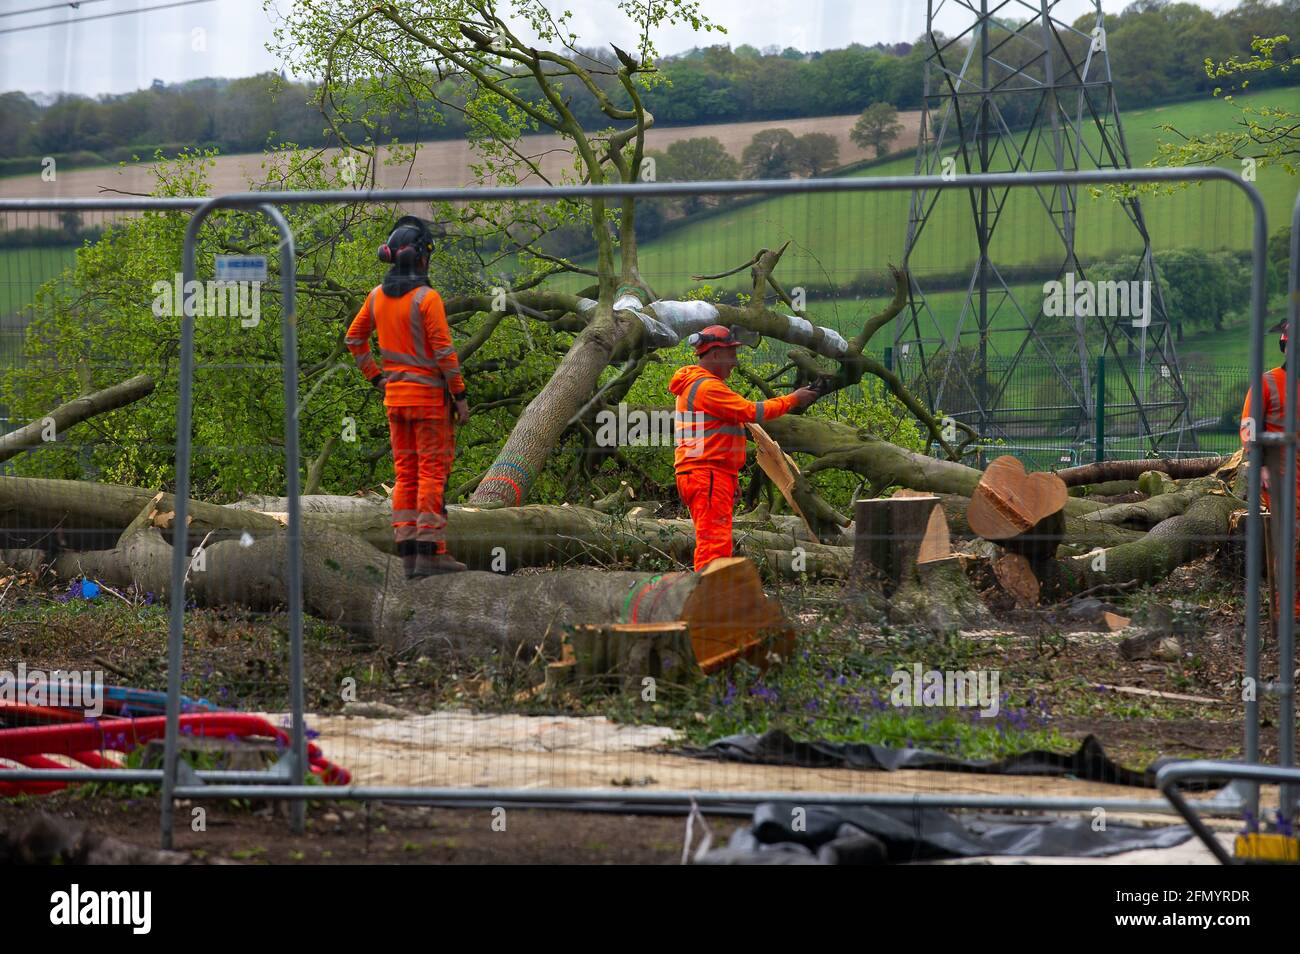 Aylesbury Vale, UK. 12th May, 2021. HS2 have wrapped cling film around some of the trees they are felling possibly to keep bats from returning to their roosts. HS2 tree fellers were felling a large number of mature beech trees in the ancient woodland today despite the licence granted to HS2 from Natural England allegedly having expired. Rare Barbastelle bats are known to roost in the woods. HS2 are destroying 108 ancient woodlands for the High Speed 2 Rail. Credit: Maureen McLean/Alamy Live News Stock Photo